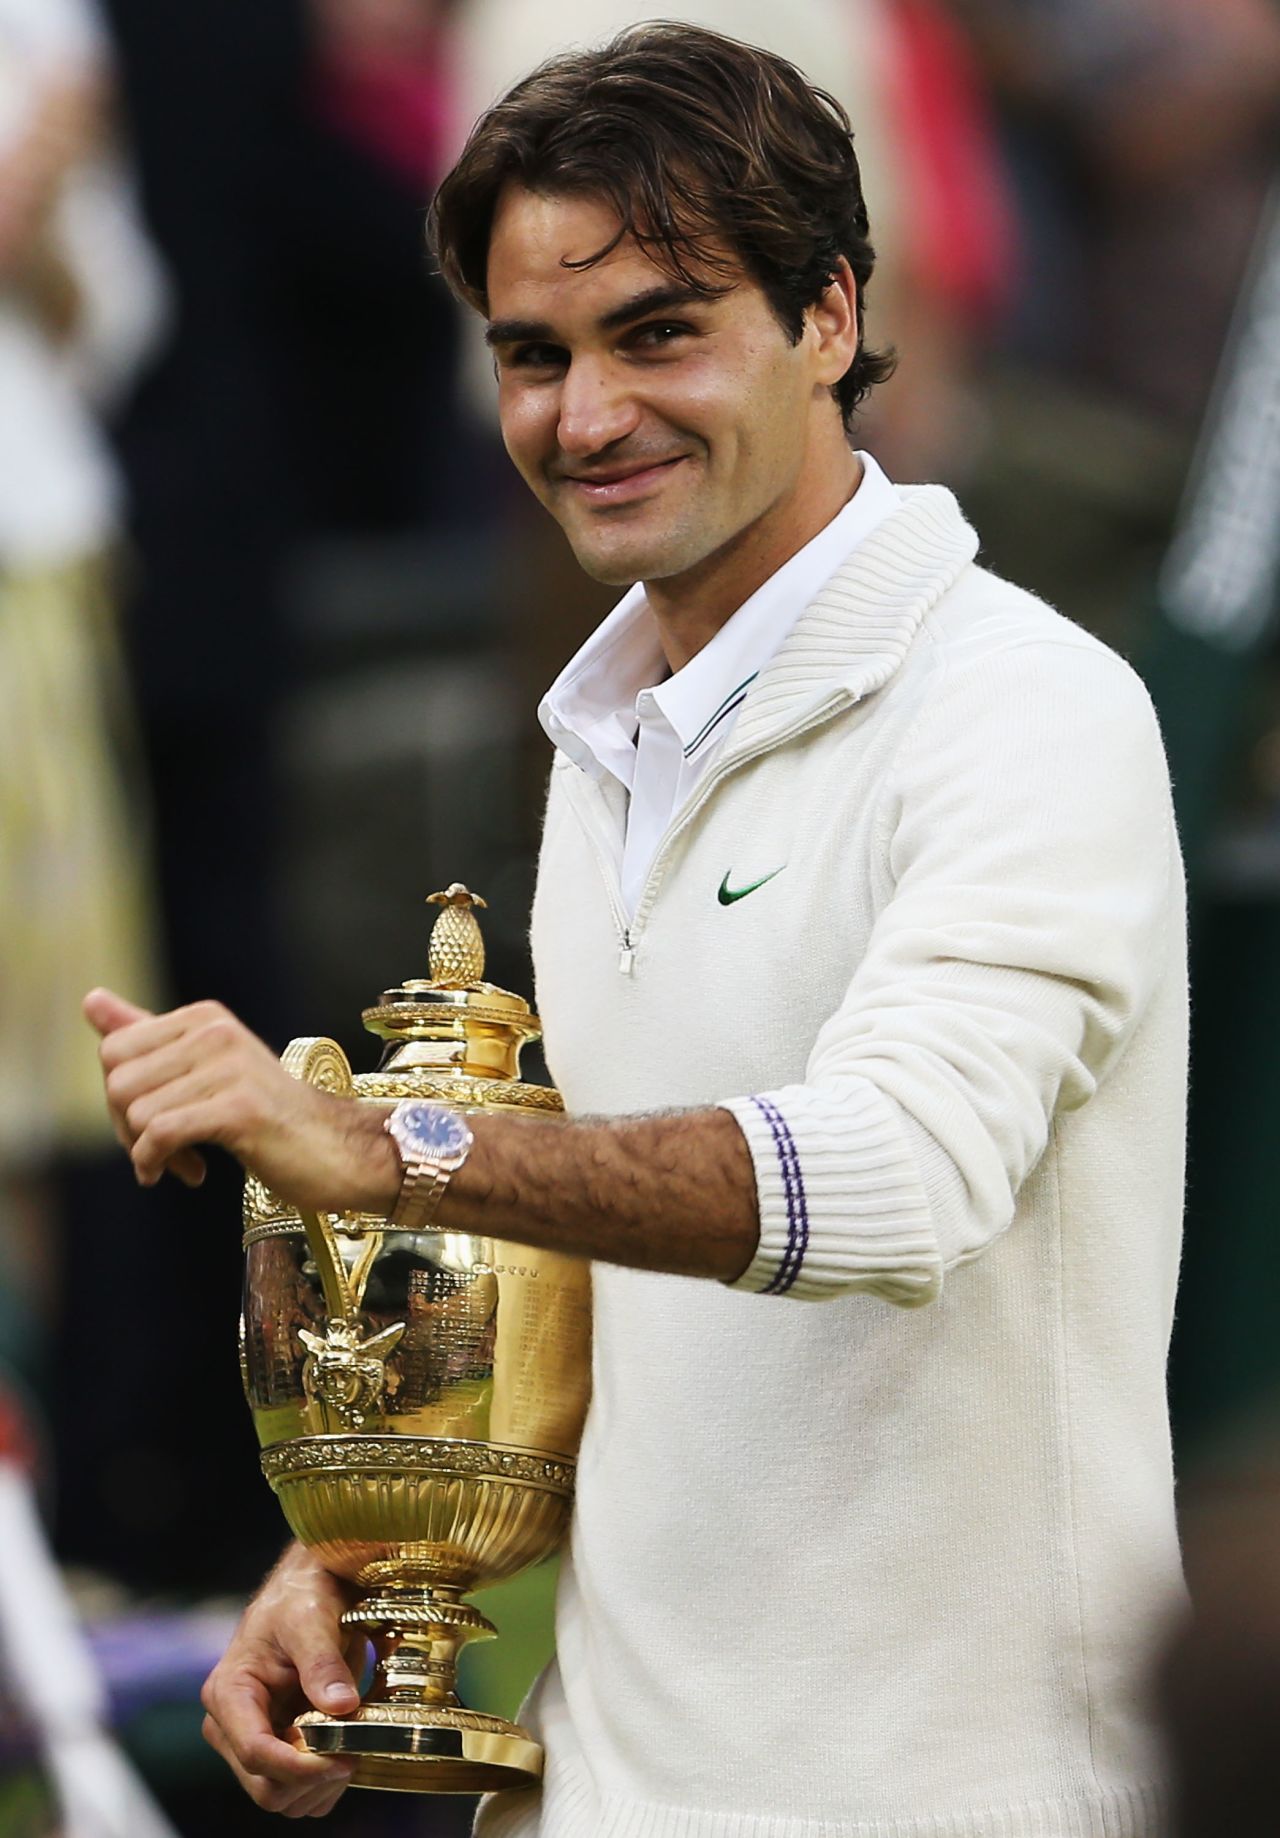 Roger Federer has surpassed Pete Sampras' record of 286 weeks at the top of the world rankings, after a two-year absence from the No. 1 spot. Federer will be hoping to cement his status as the best in the world with a gold medal at the Olympic Games in London later this month.